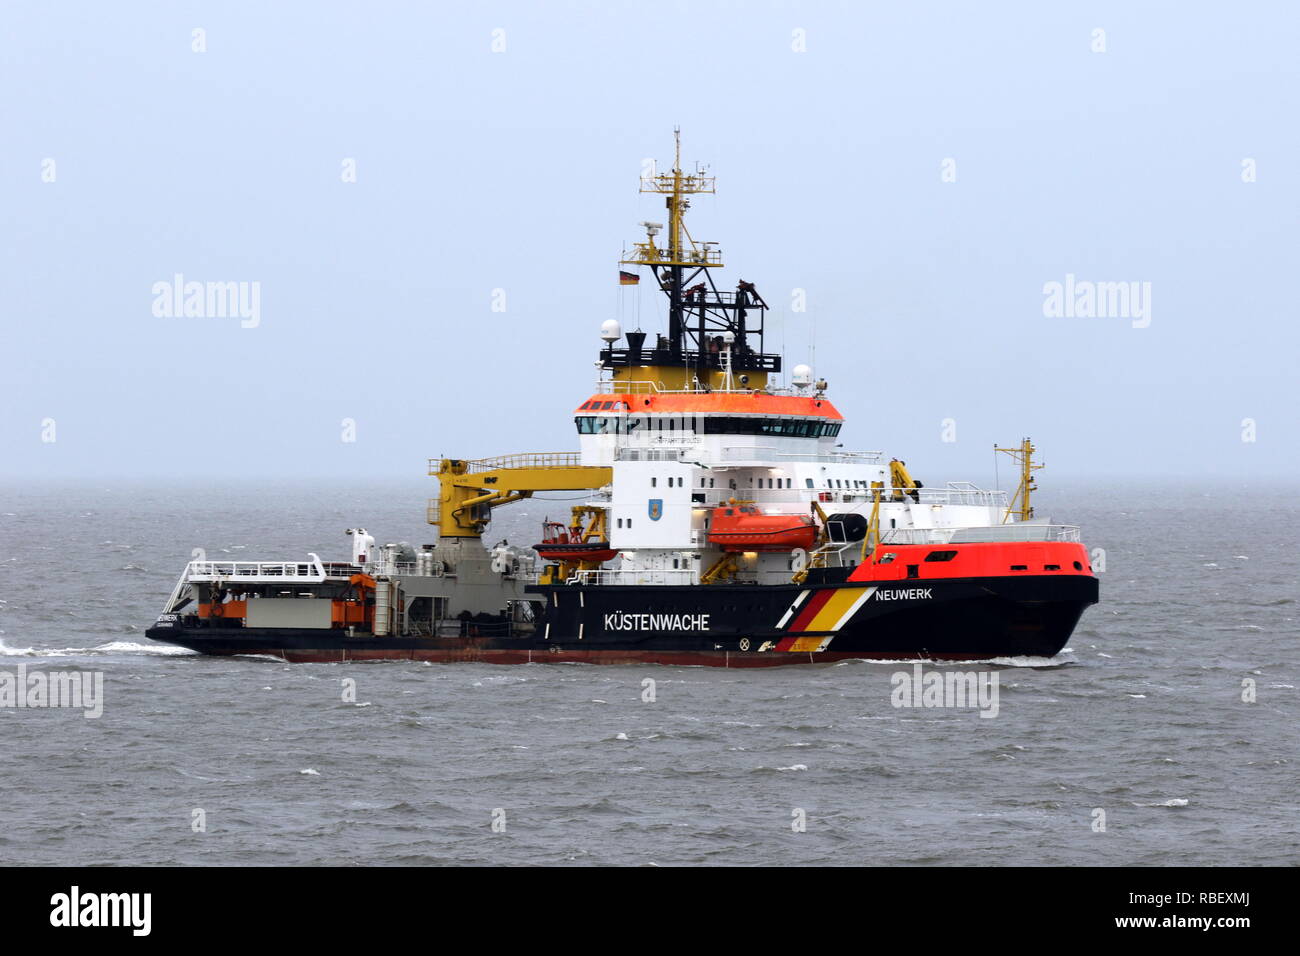 The ship of the Coast Guard Neuwerk reached on 17 December 2016, the port of Cuxhaven. Stock Photo